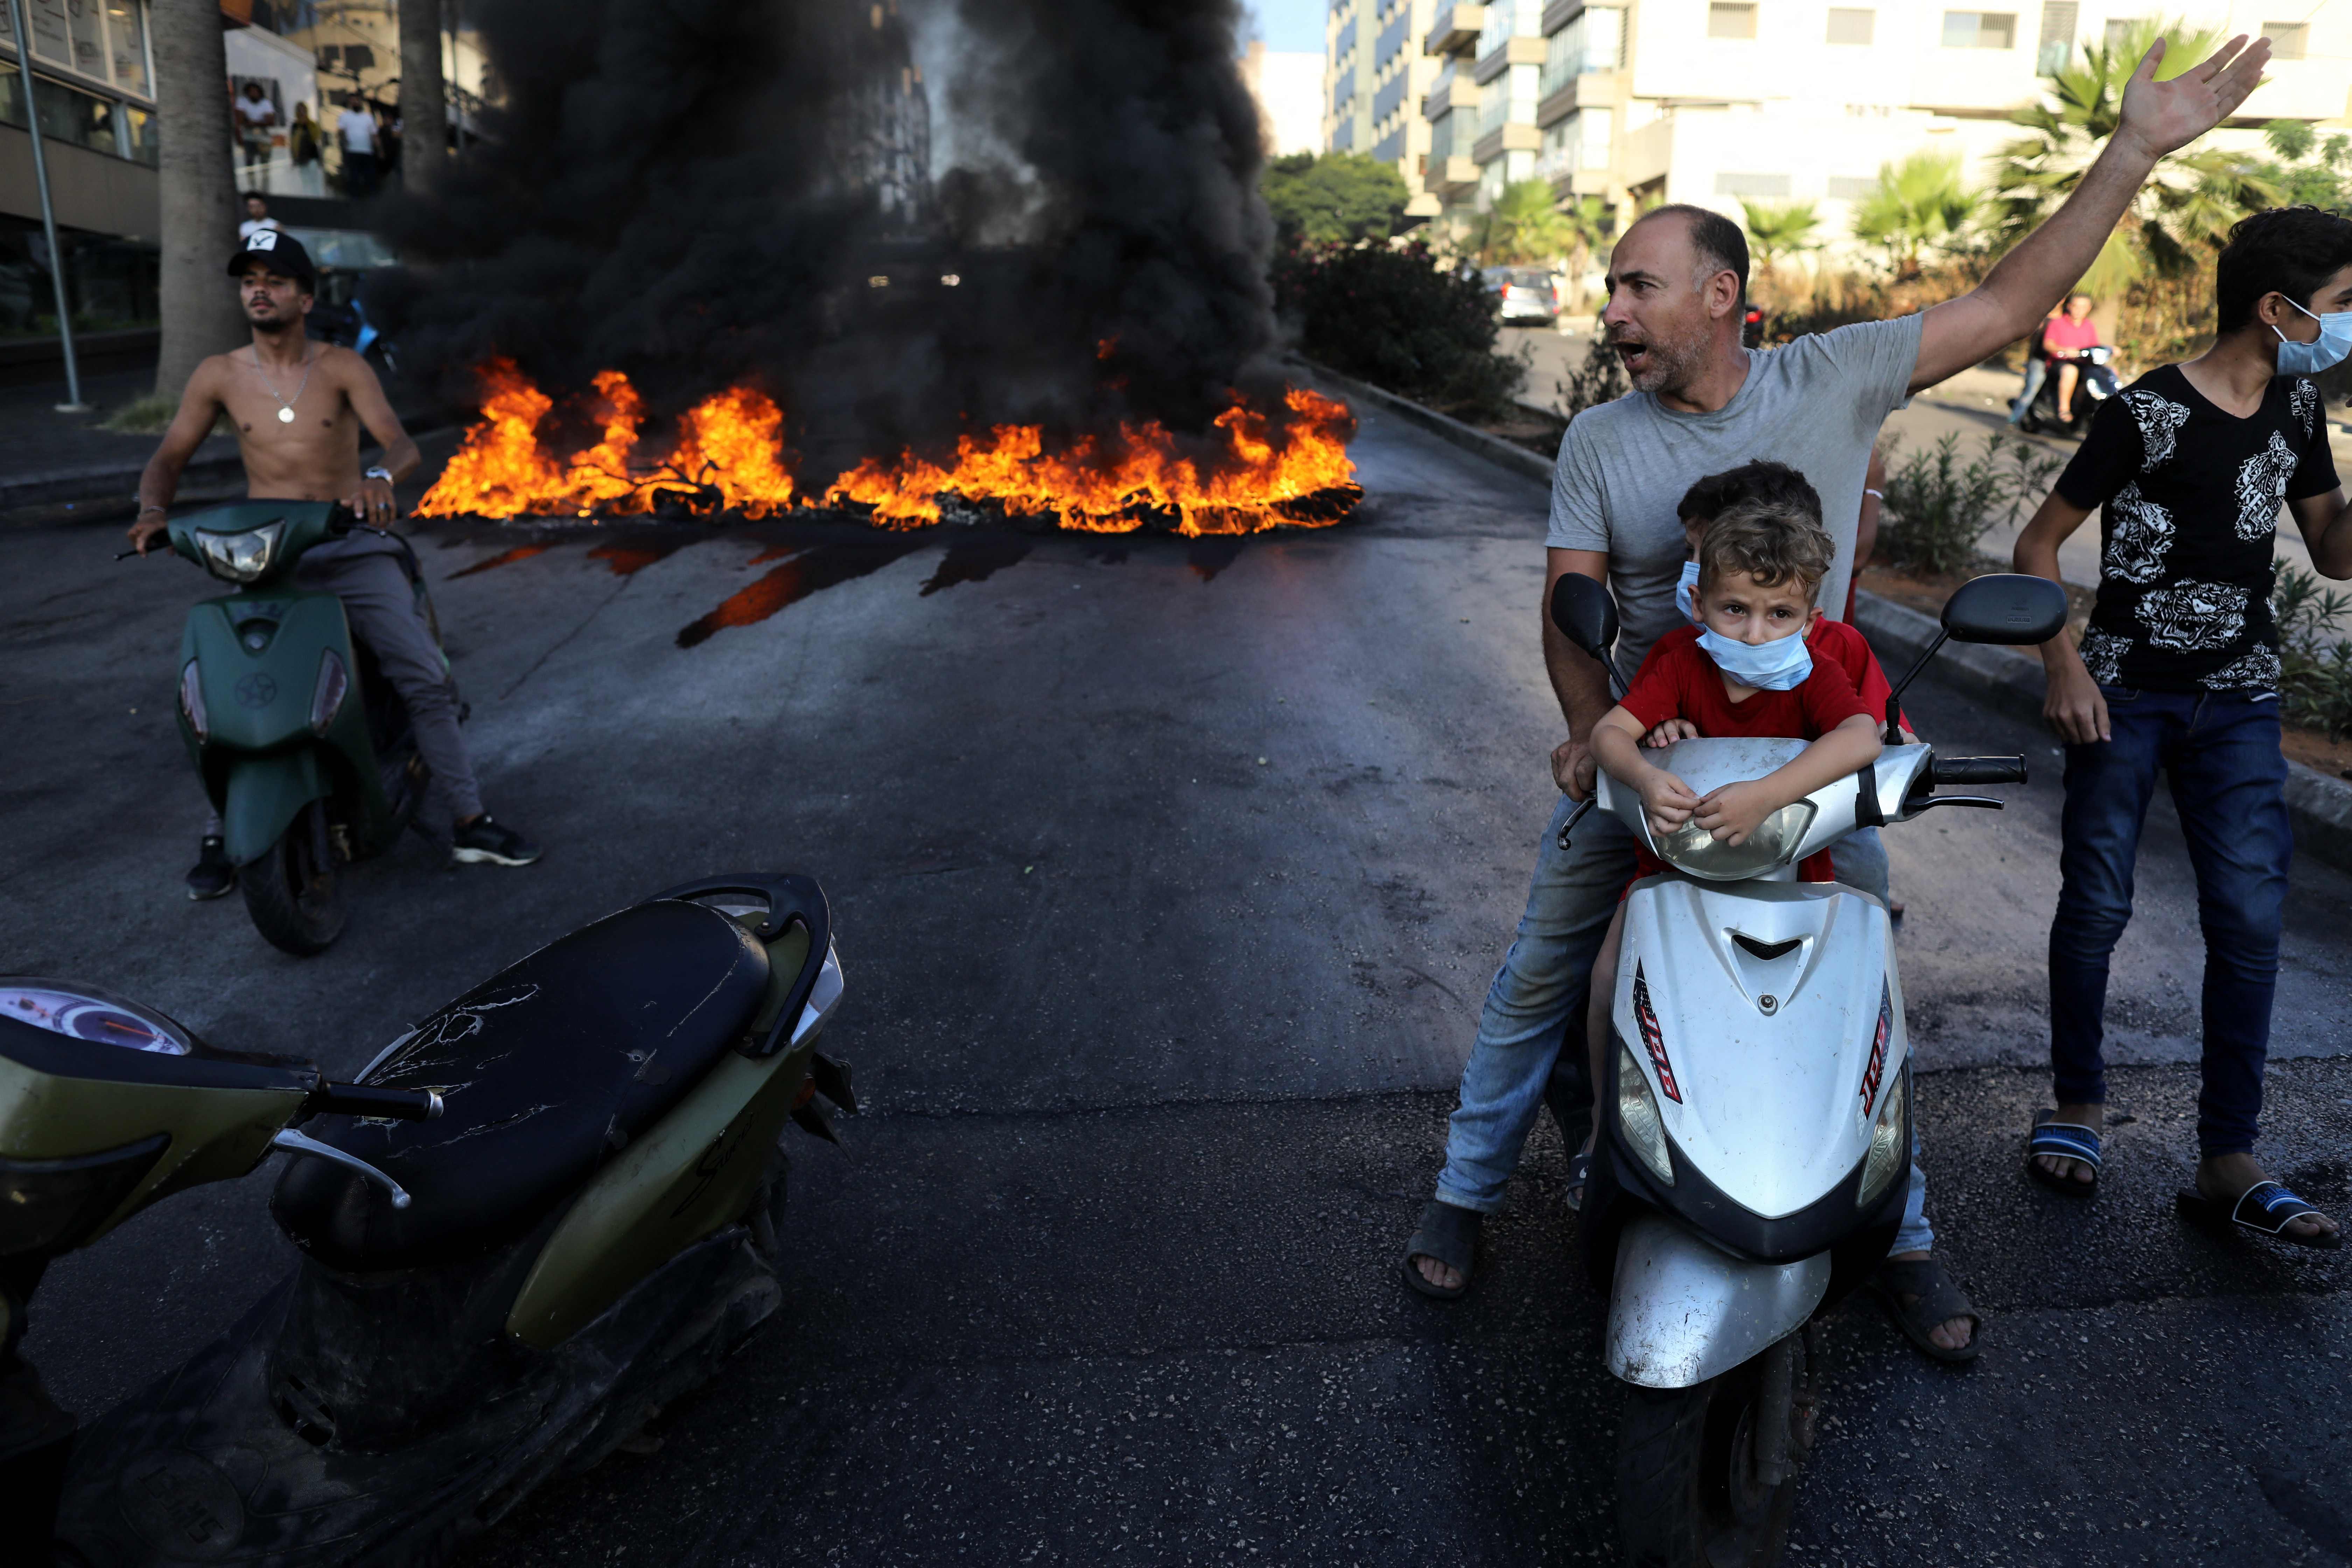 <p>A Lebanese man on a scooter with two children gestures near tires set on fire during a protest at a main road in Lebanon’s capital Beirut against dire conditions amidst the ongoing economical and political crisis</p>